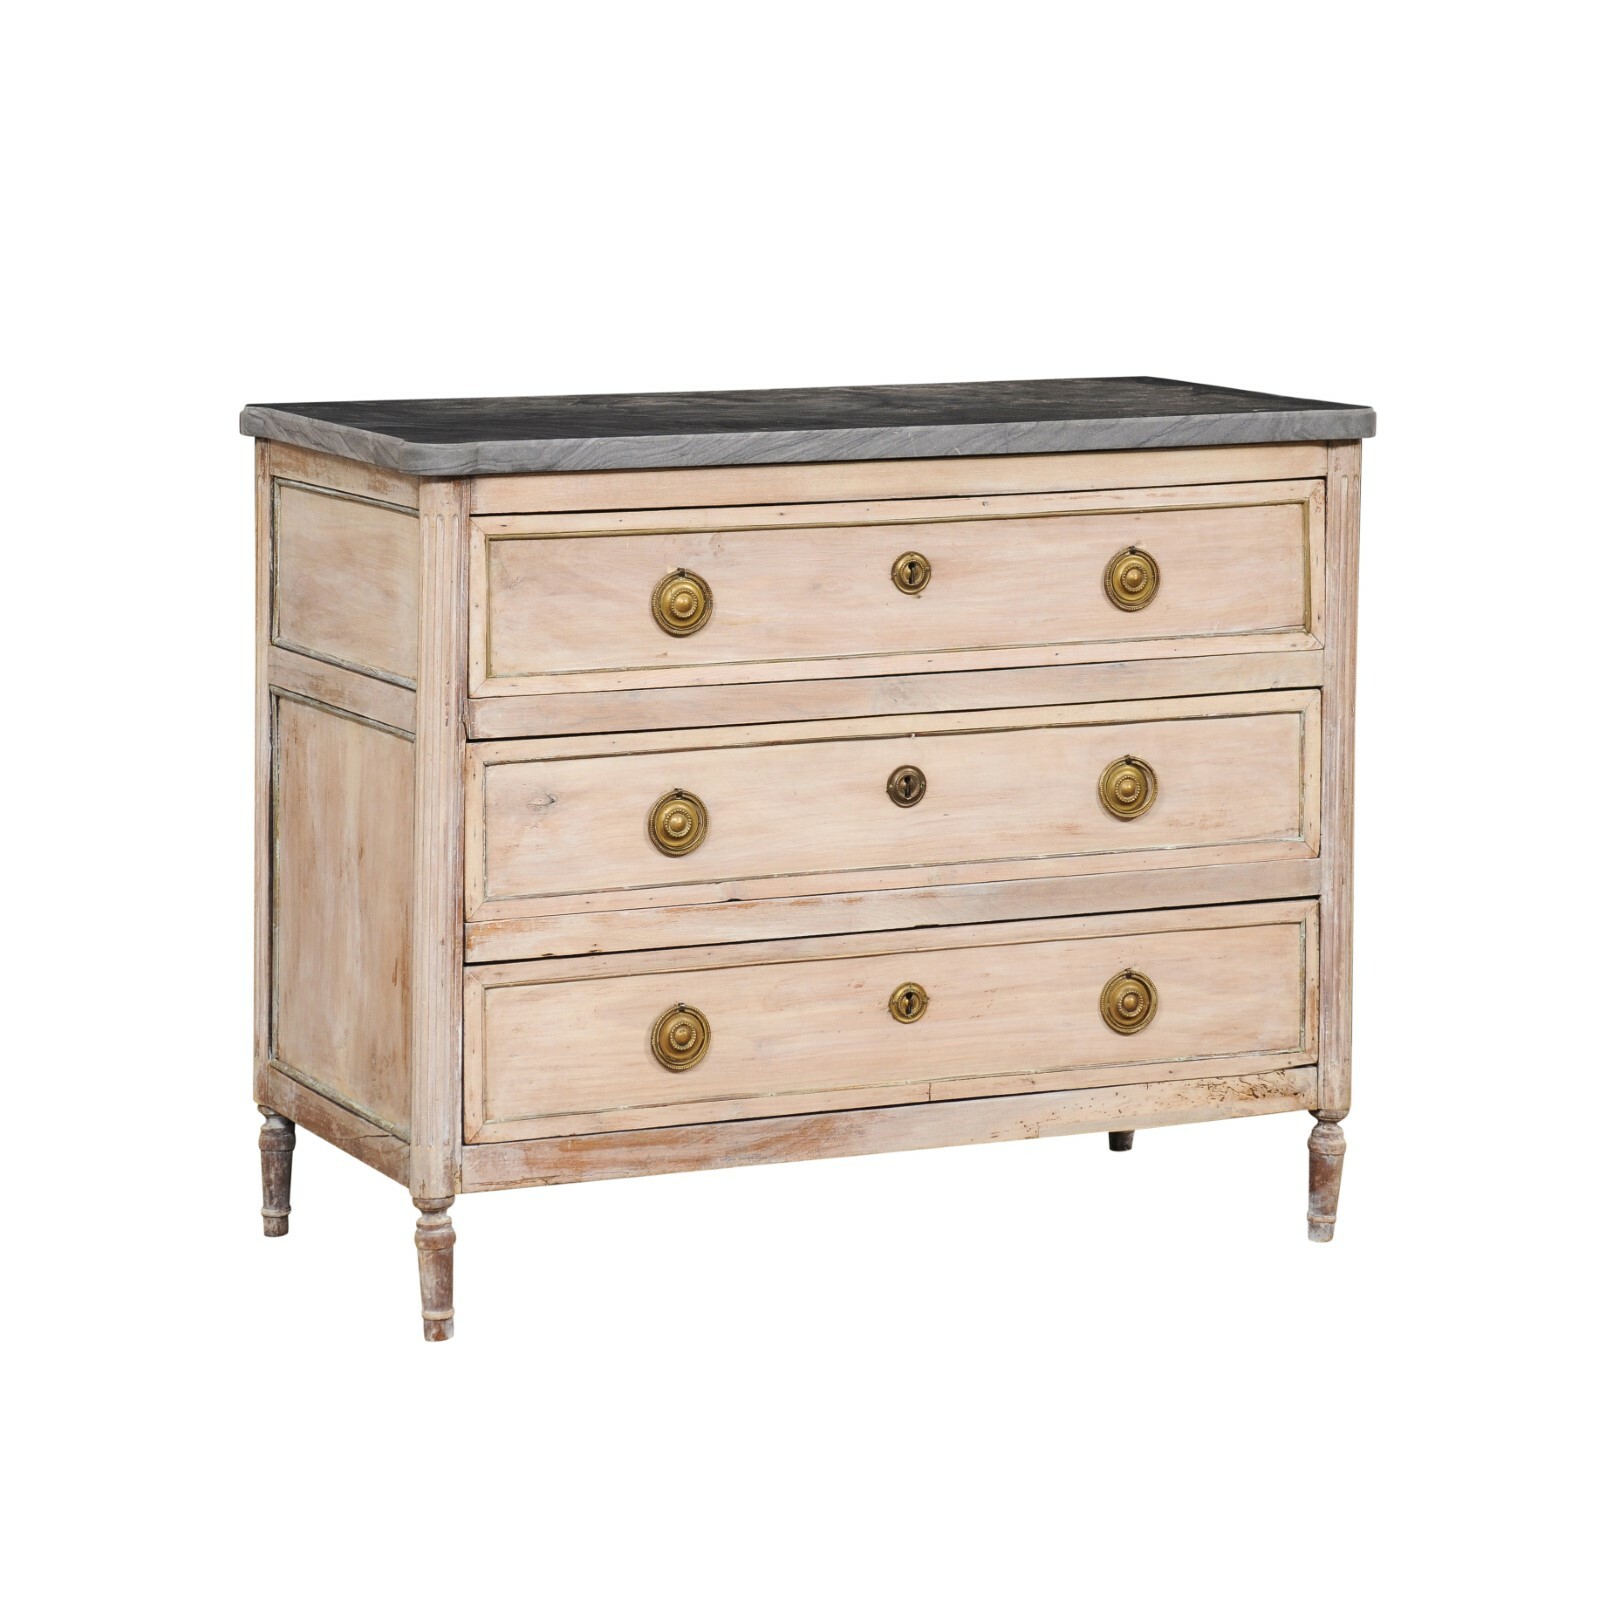 Period Neoclassic French Marble Top Commode